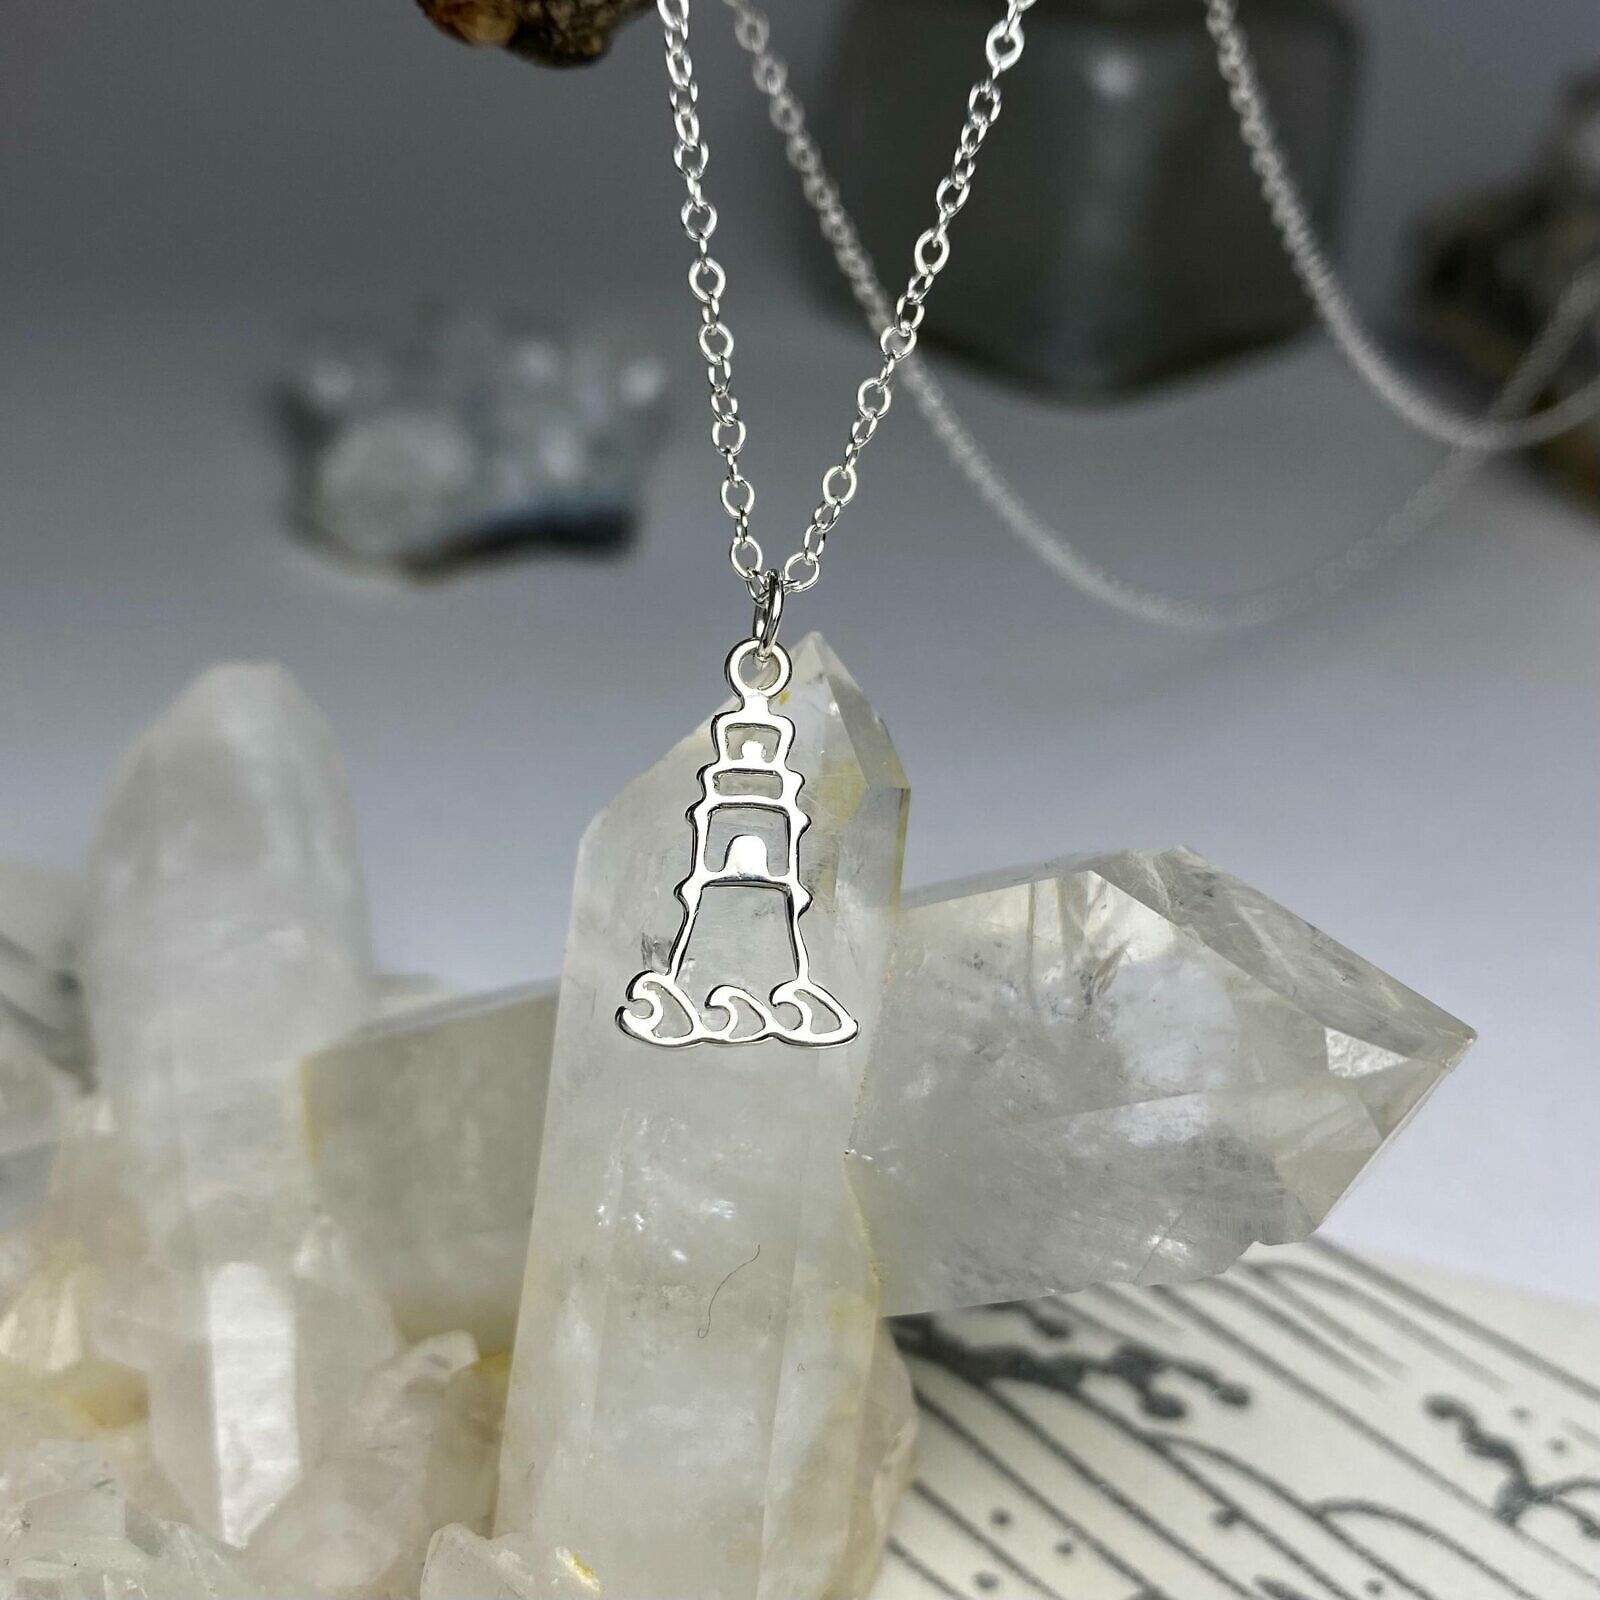 Lighthouse Charm (Sterling Silver) - 1 pc.